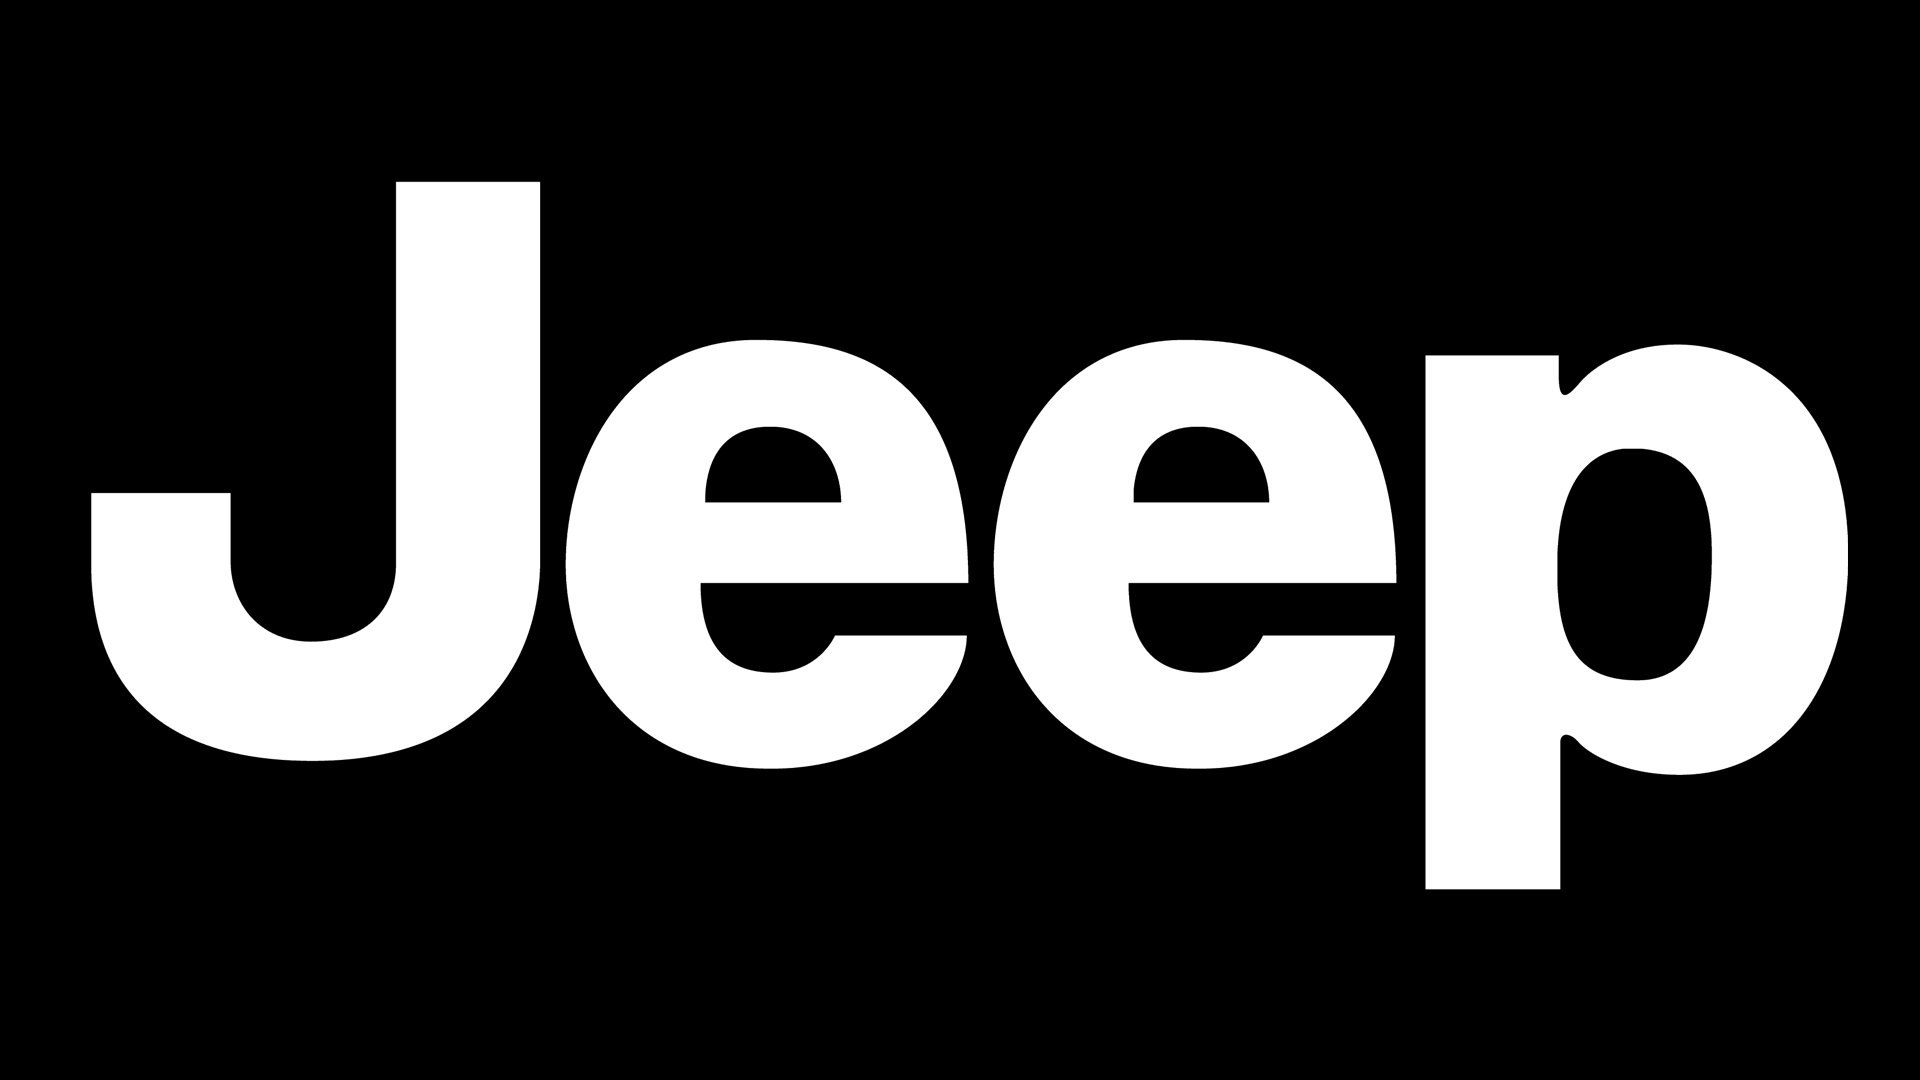 Black Jeep Logo Wallpaper You can download in ai eps cdr svg png formats